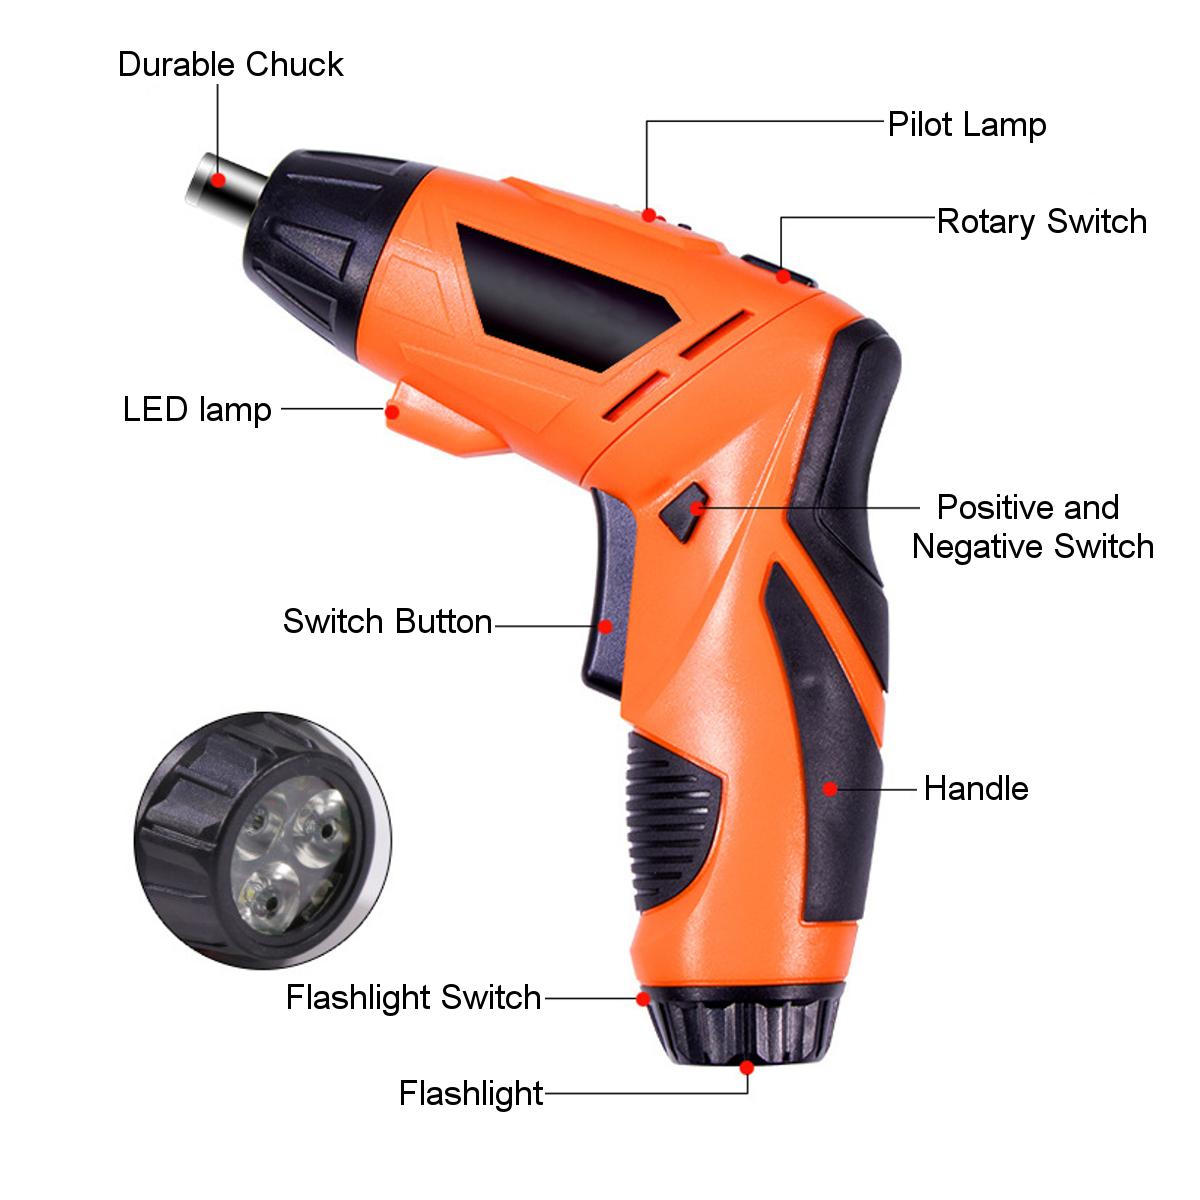 47-in-1-Rechargeable-Wireless-Cordless-Electric-Screwdriver-Drill-Kit-Power-Tool-Home-Improvement-DI-1780811-9